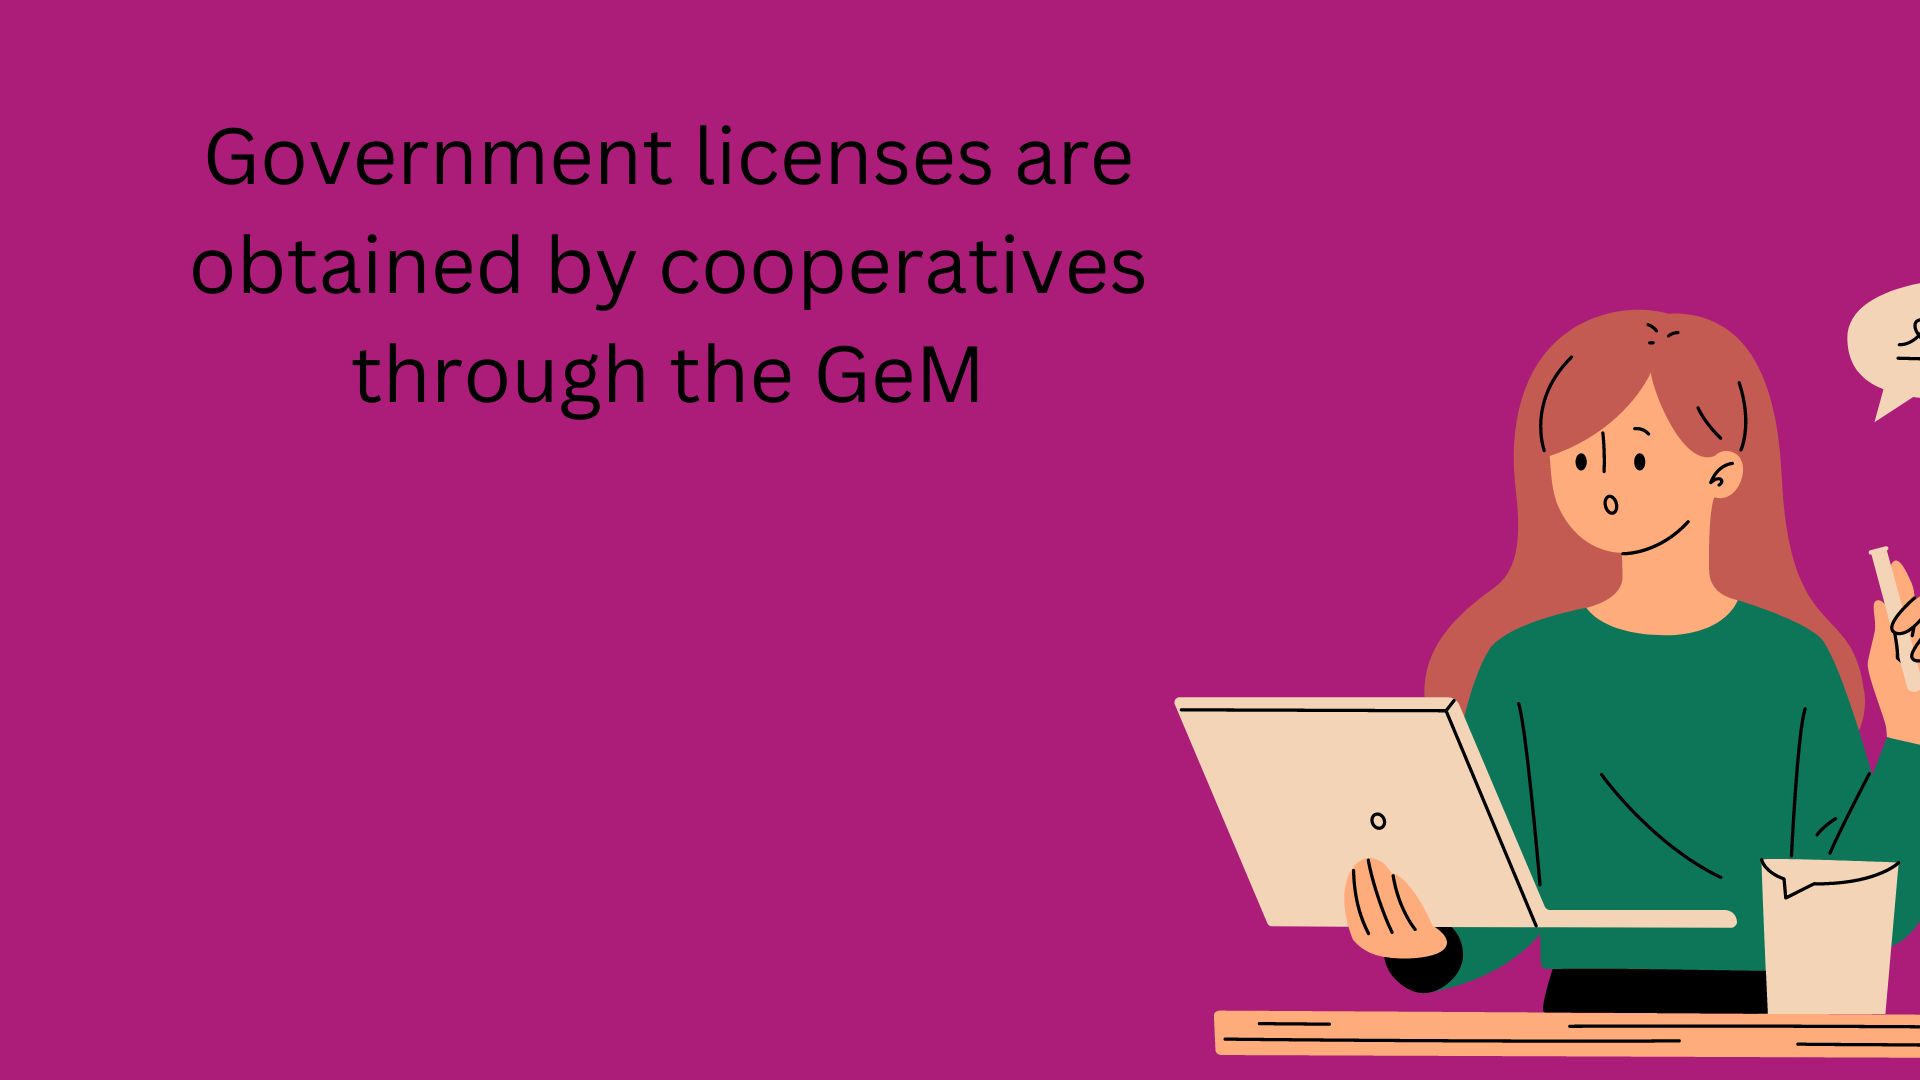 Government licenses are obtained by cooperatives through the GeM